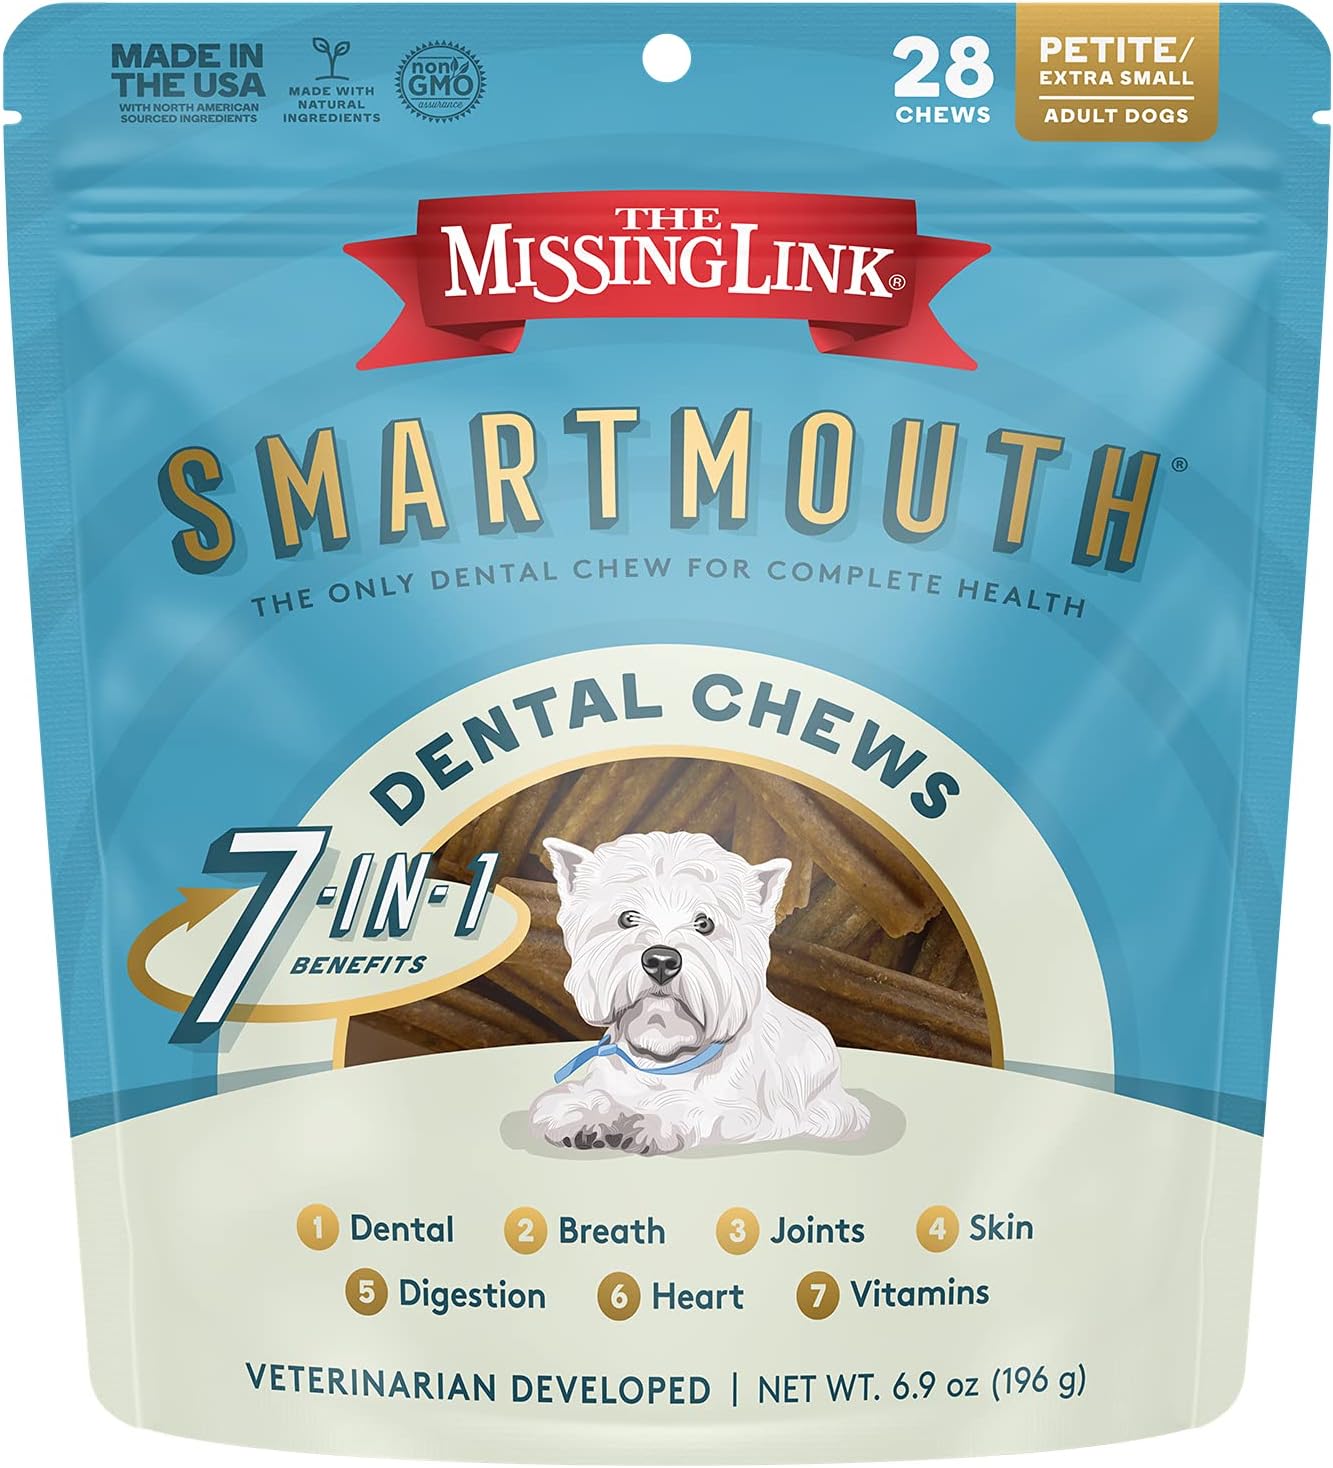 The Missing Link Smartmouth Vet Developed Dental Chew Treats, 7-in-1 Benefits: Healthy Teeth & Gums, Breath, Skin, Joints, Digestion, Heart, Immune System – Petite/XS 5-15lb Dogs, 28 Ct